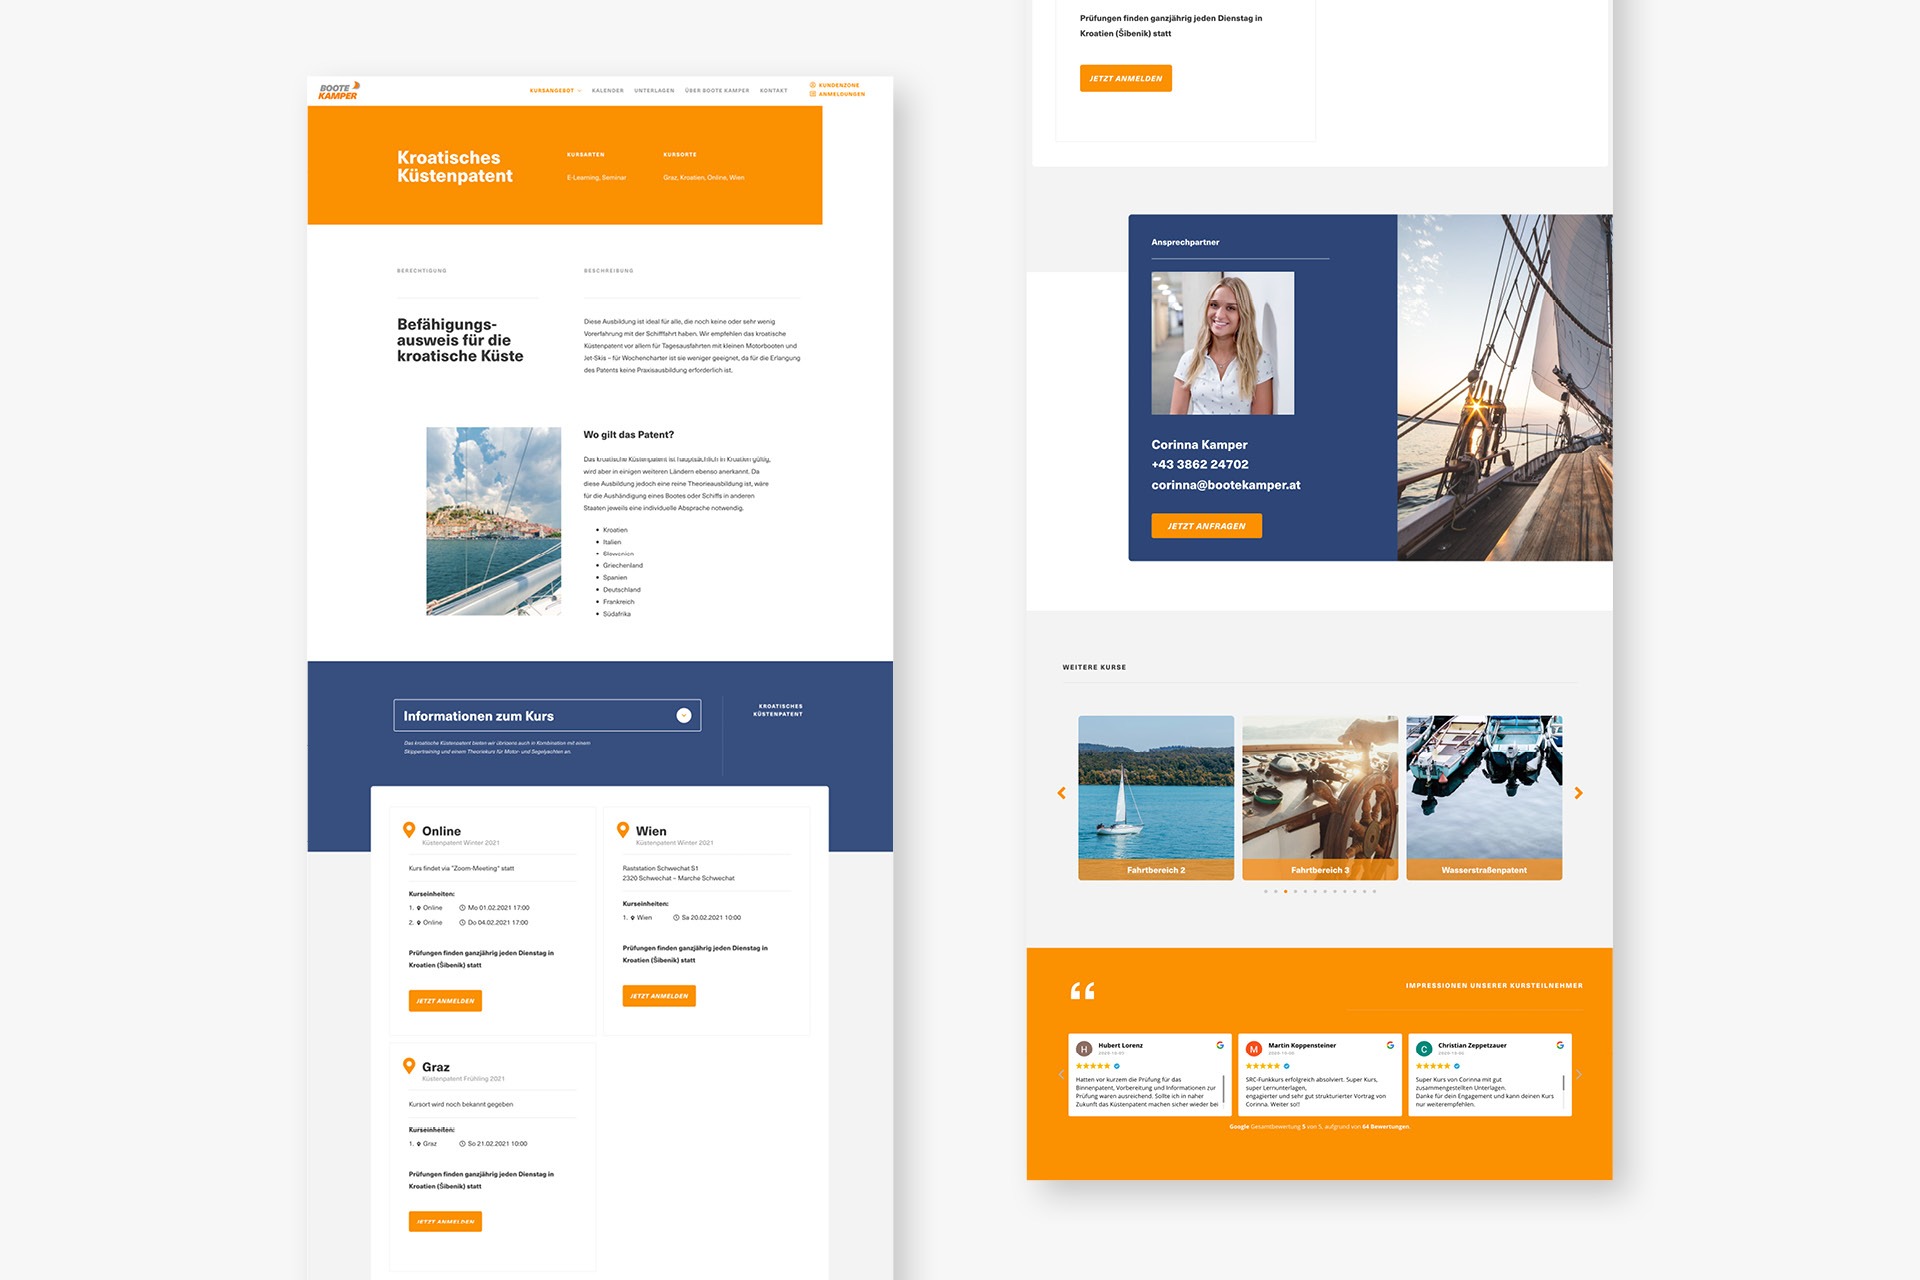 A website design for a travel agency focused on boat tours and driving license certification.